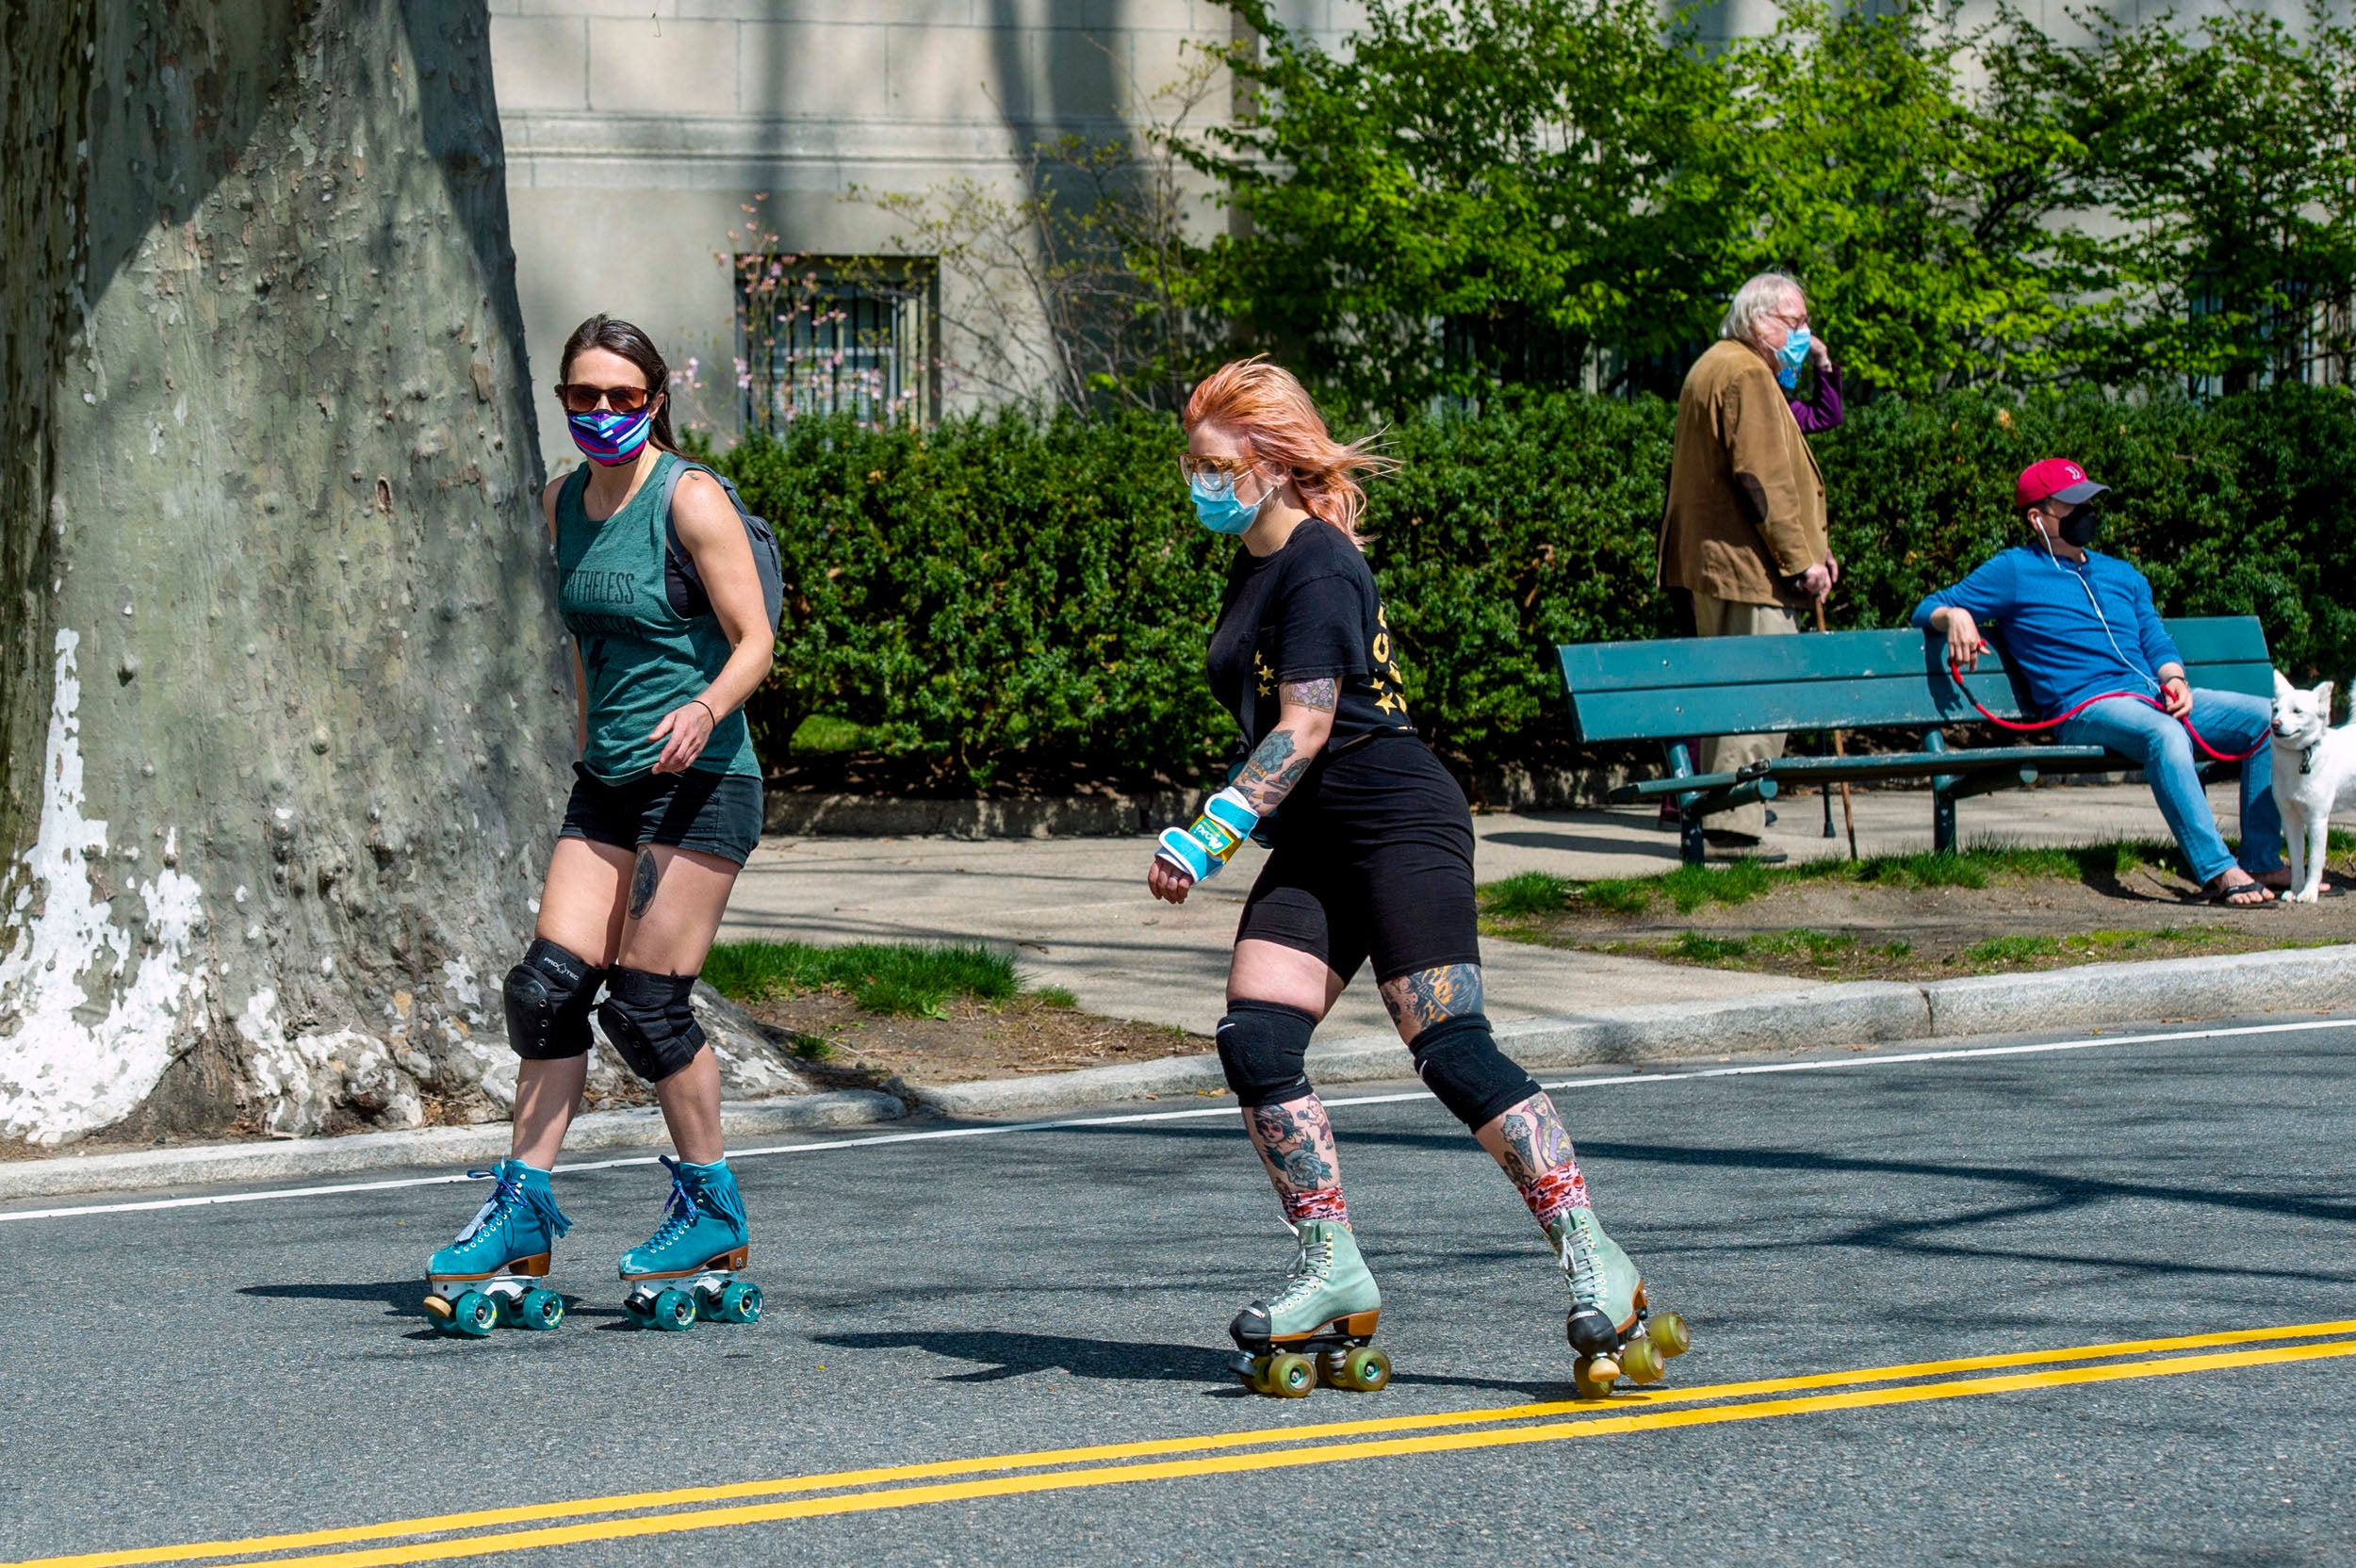 A couple of Rollerbladers glide past a walker and a man sitting on a bench with his dog.